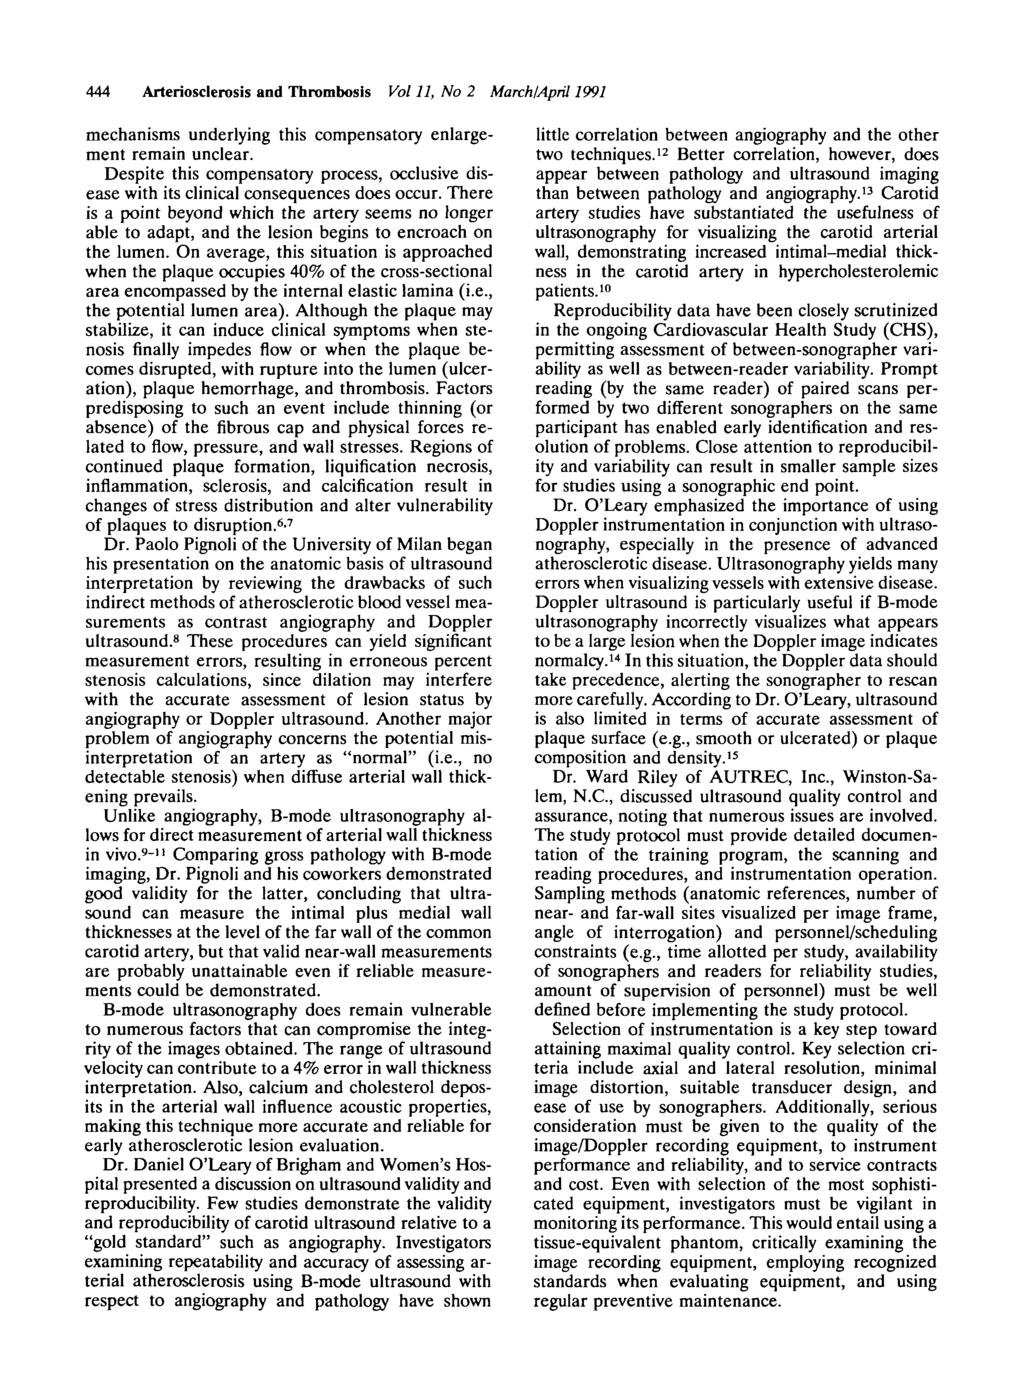 444 Arteriosclerosis and Thrombosis Vol 11, No 2 March/April 1991 mechanisms underlying this compensatory enlargement remain unclear.